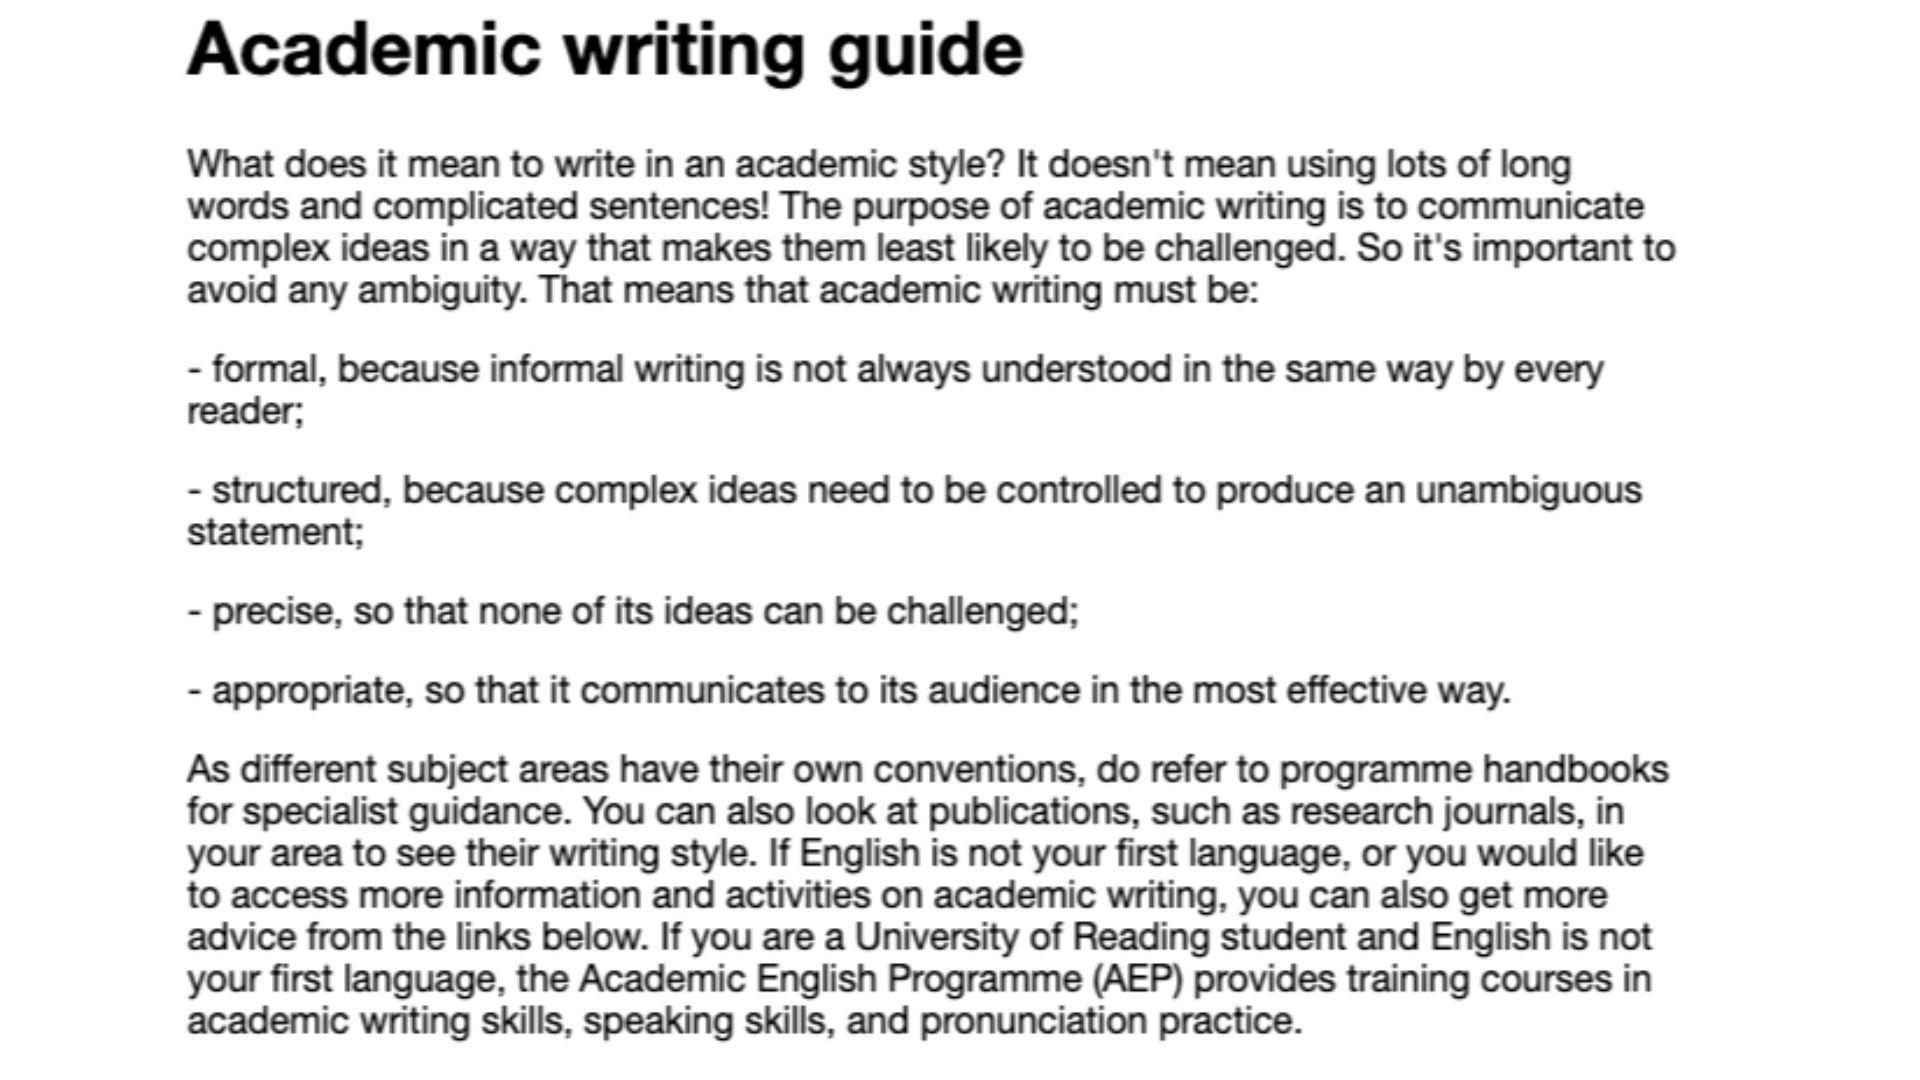 Academic Writing Guide for Android - APK Download